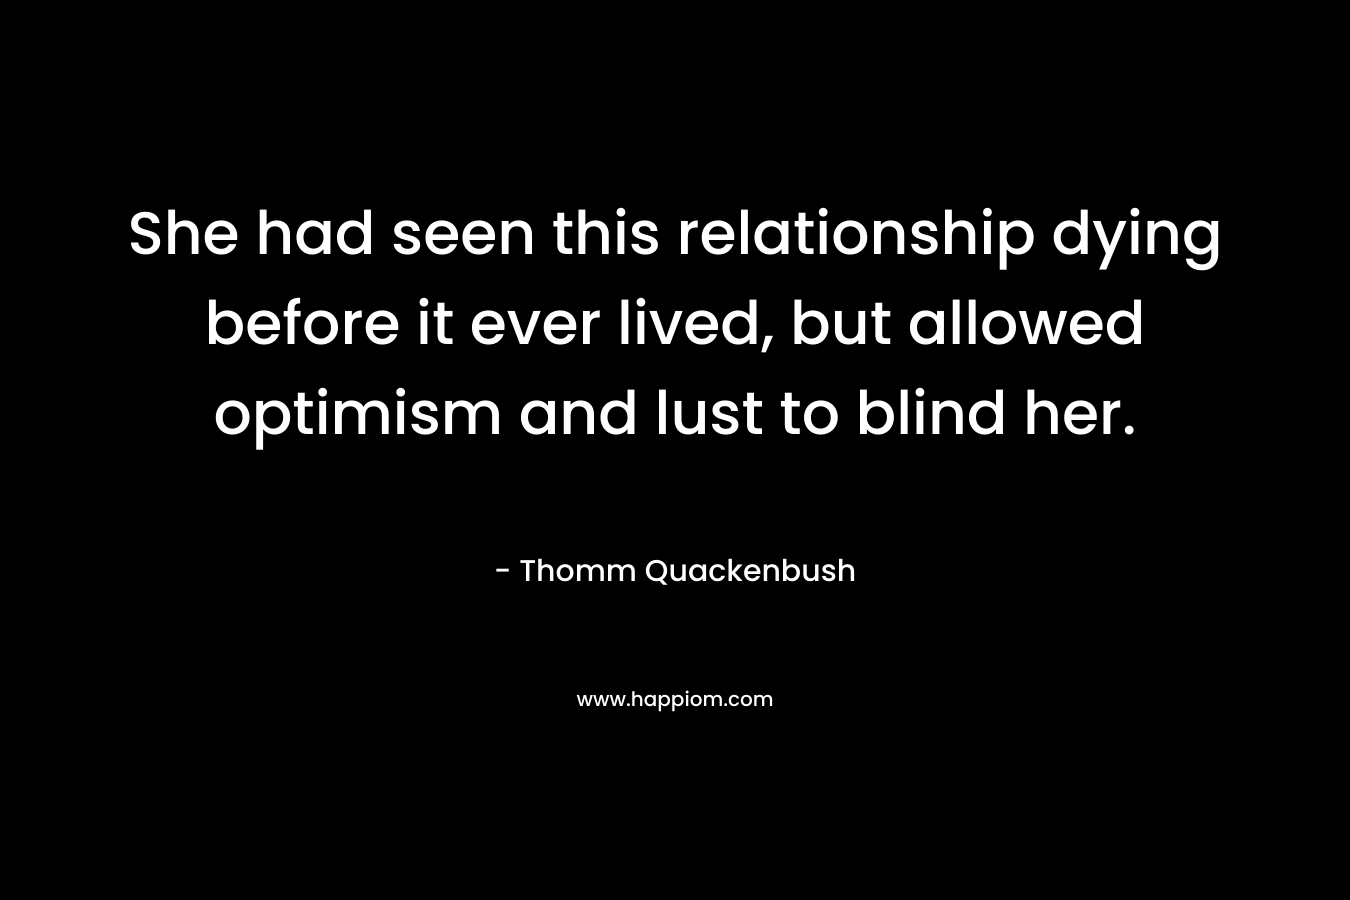 She had seen this relationship dying before it ever lived, but allowed optimism and lust to blind her.